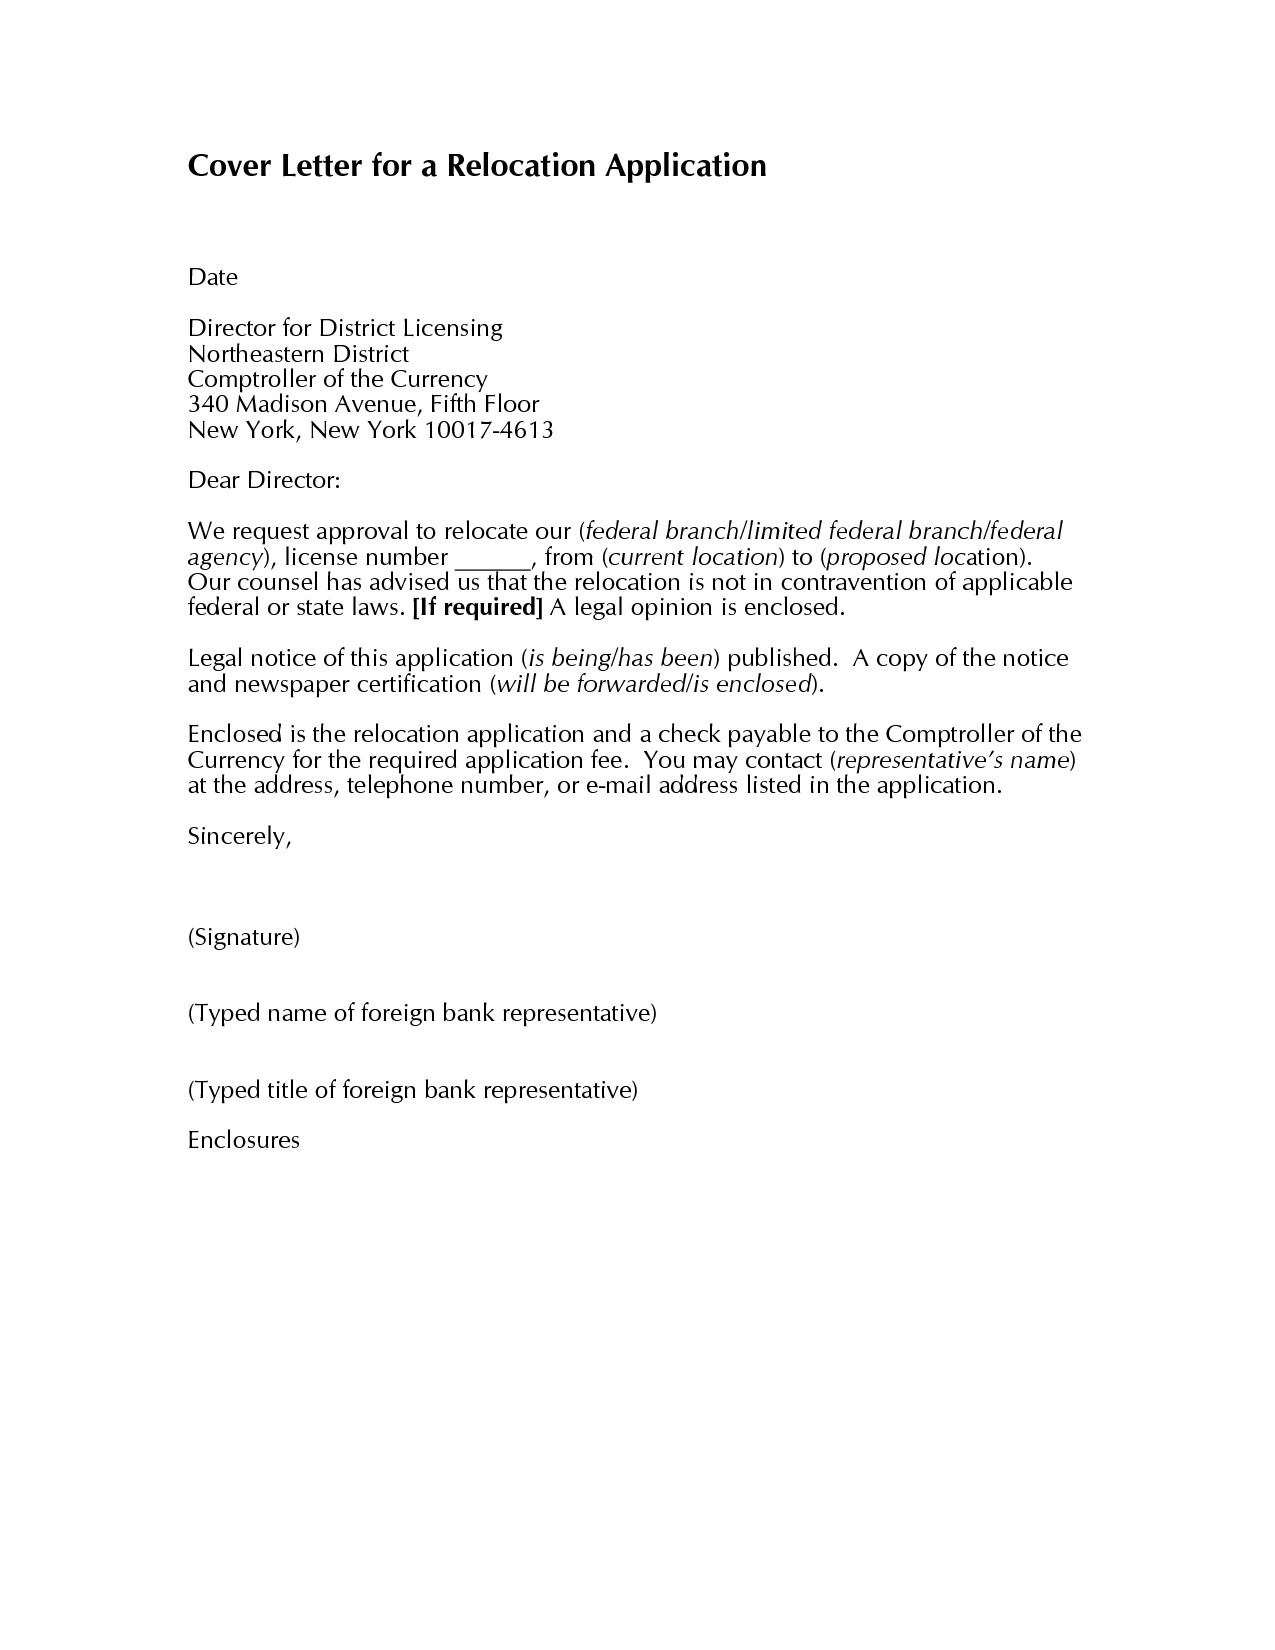 Relocation Cover Letter Template Free - Job Relocation Letter Sample Valid Willing to Relocate Cover Letter